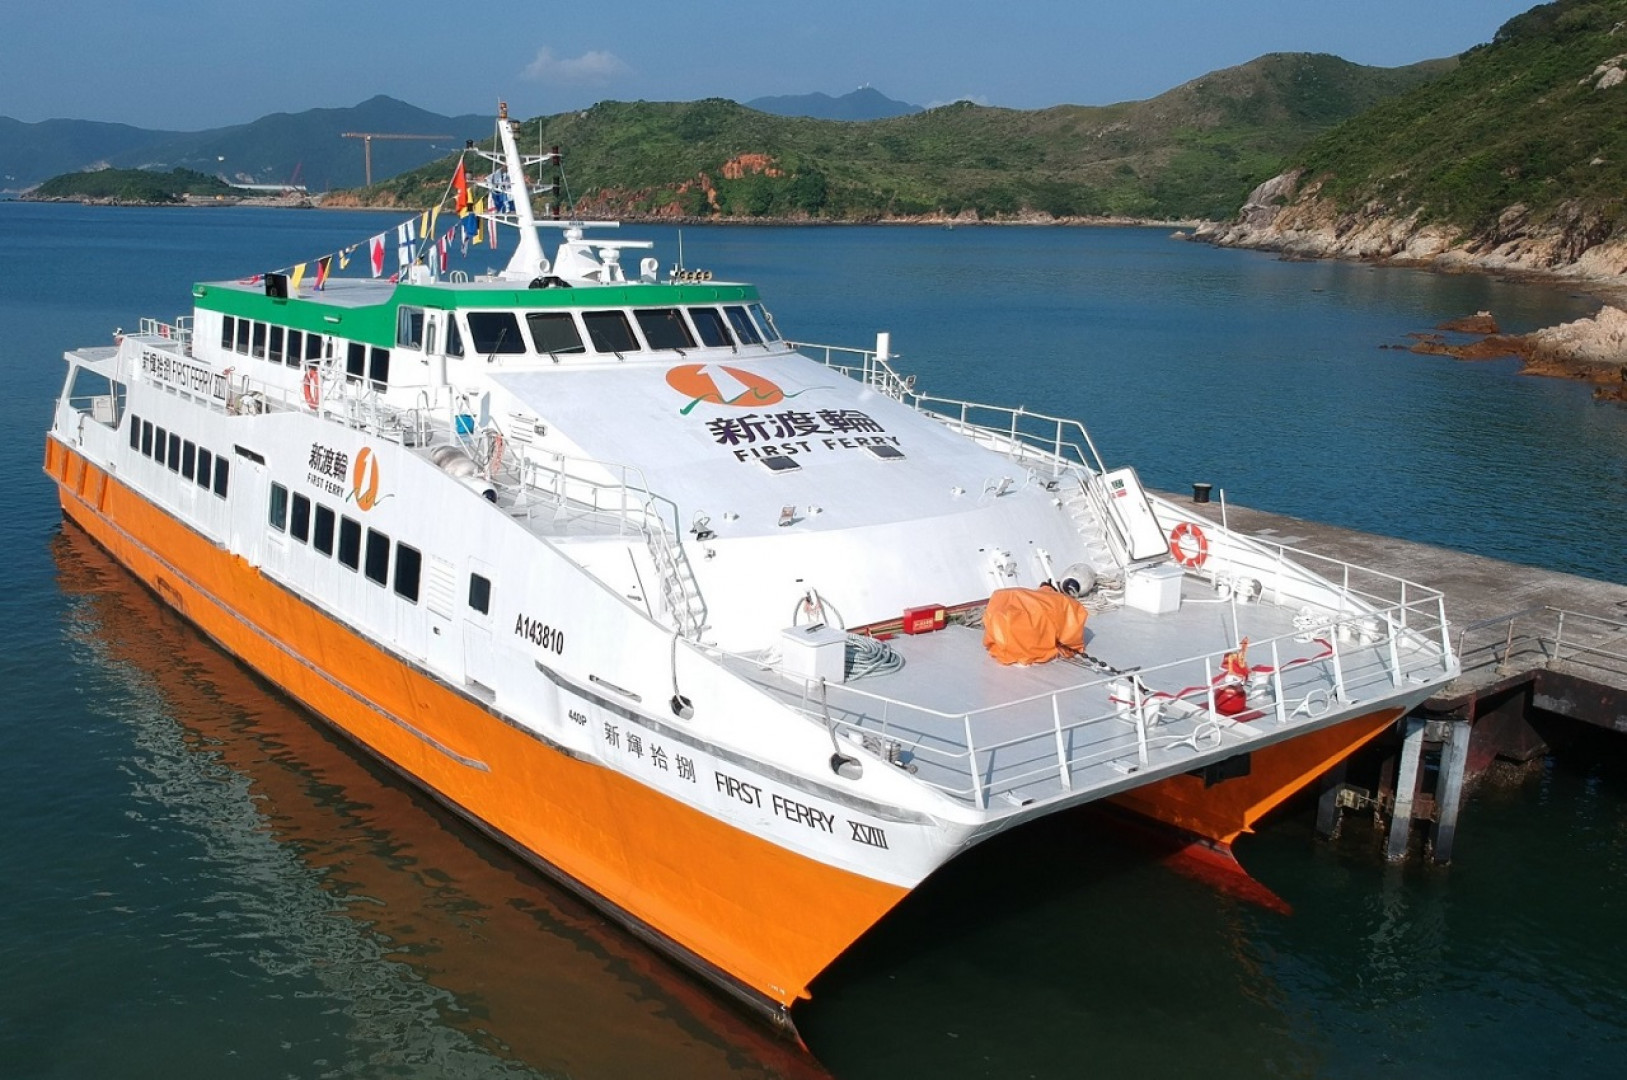 Debut of "First Ferry XVIII"